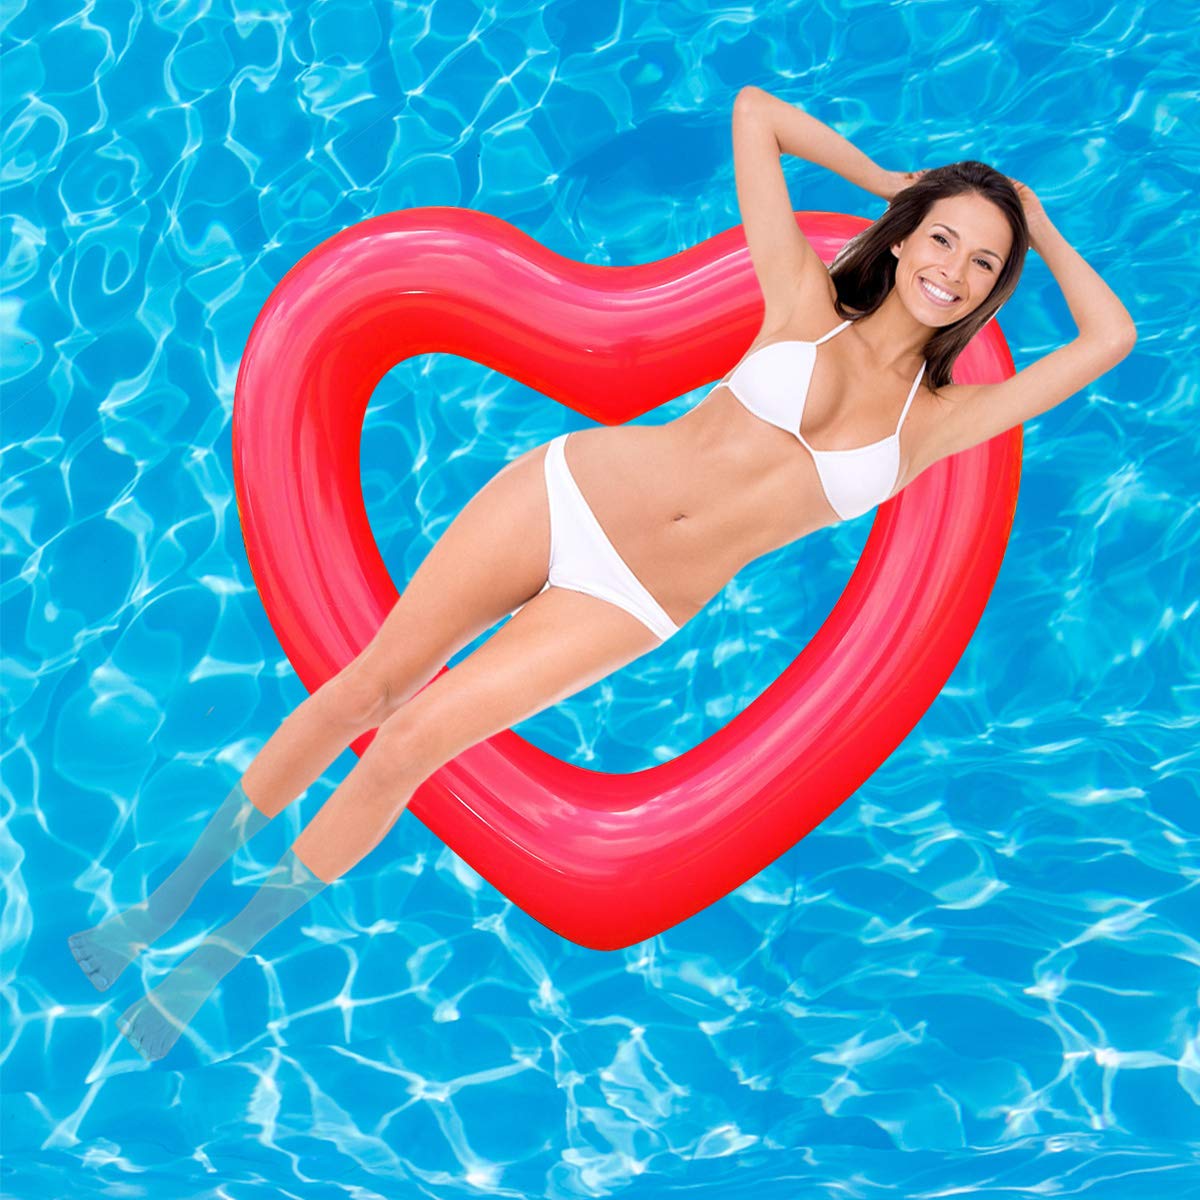 SUNSHINE-MALL Inflatable Swim Rings, Heart Shaped Swimming Pool Float Loungers Tube, Water Fun Beach Party Toys for Kids, Adults Gold,Red